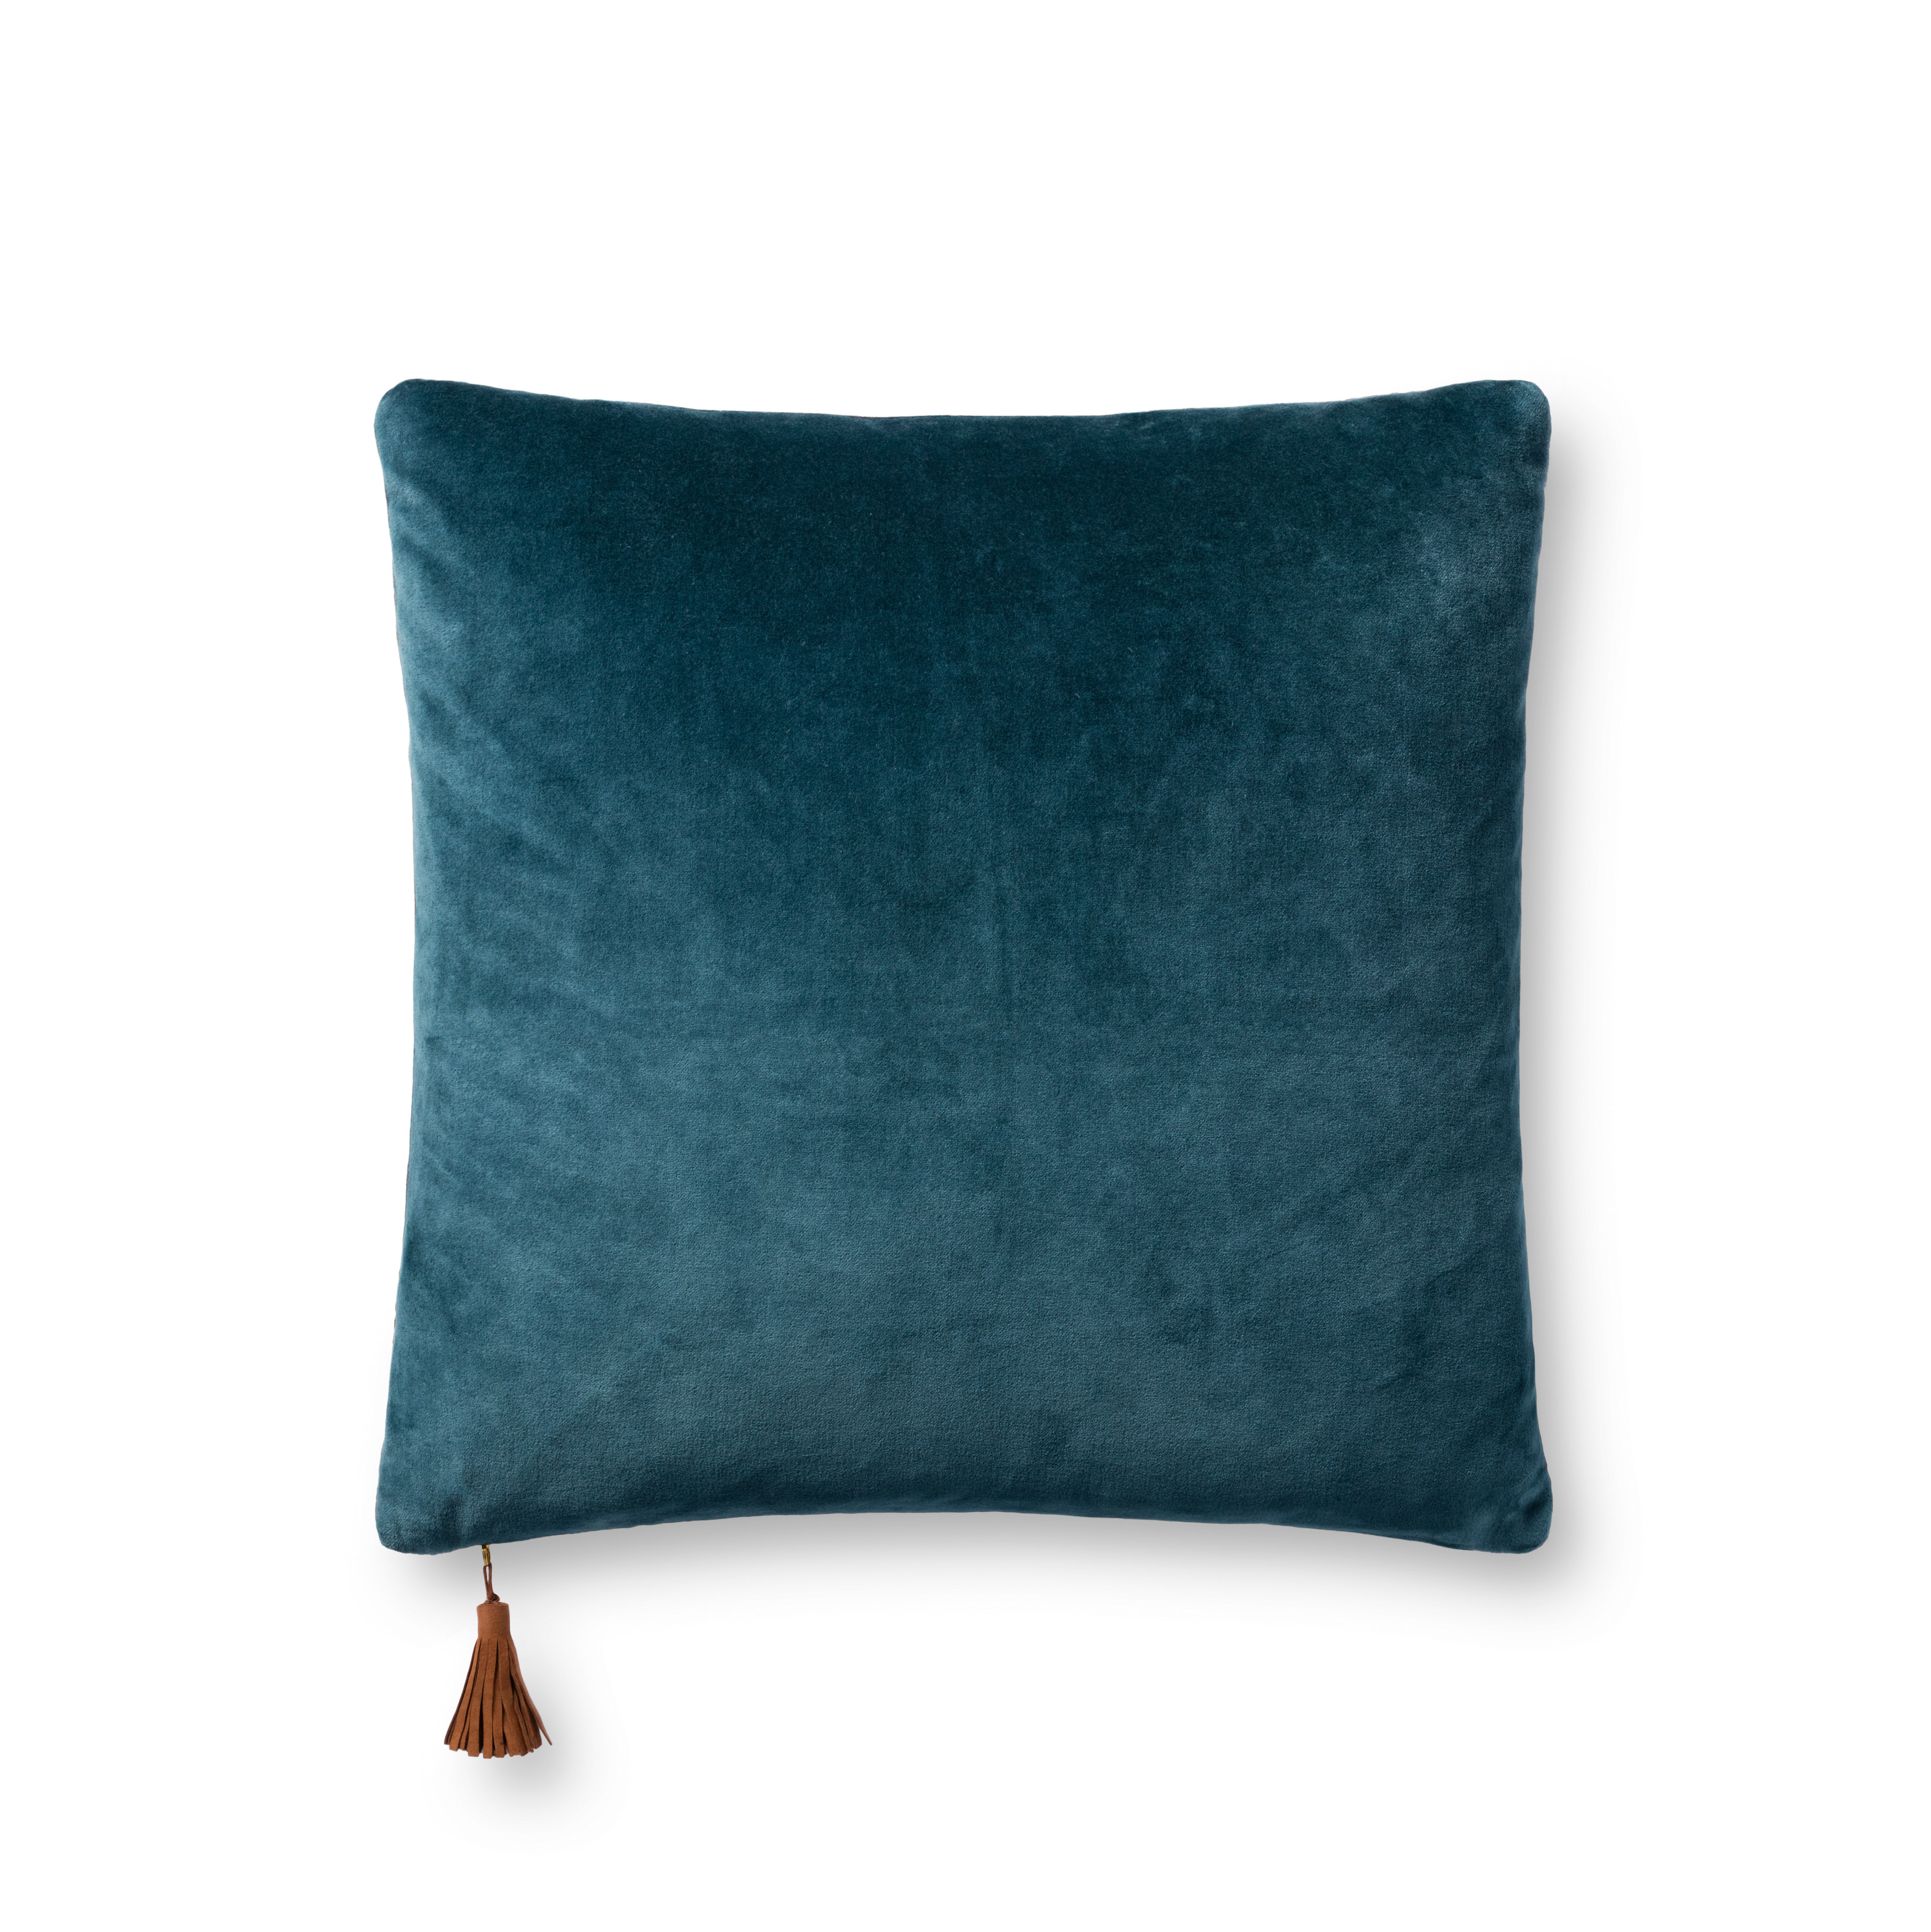 PILLOWS P1153 NAVY / COFFEE 18" x 18" Cover w/Down - Magnolia Home by Joana Gaines Crafted by Loloi Rugs